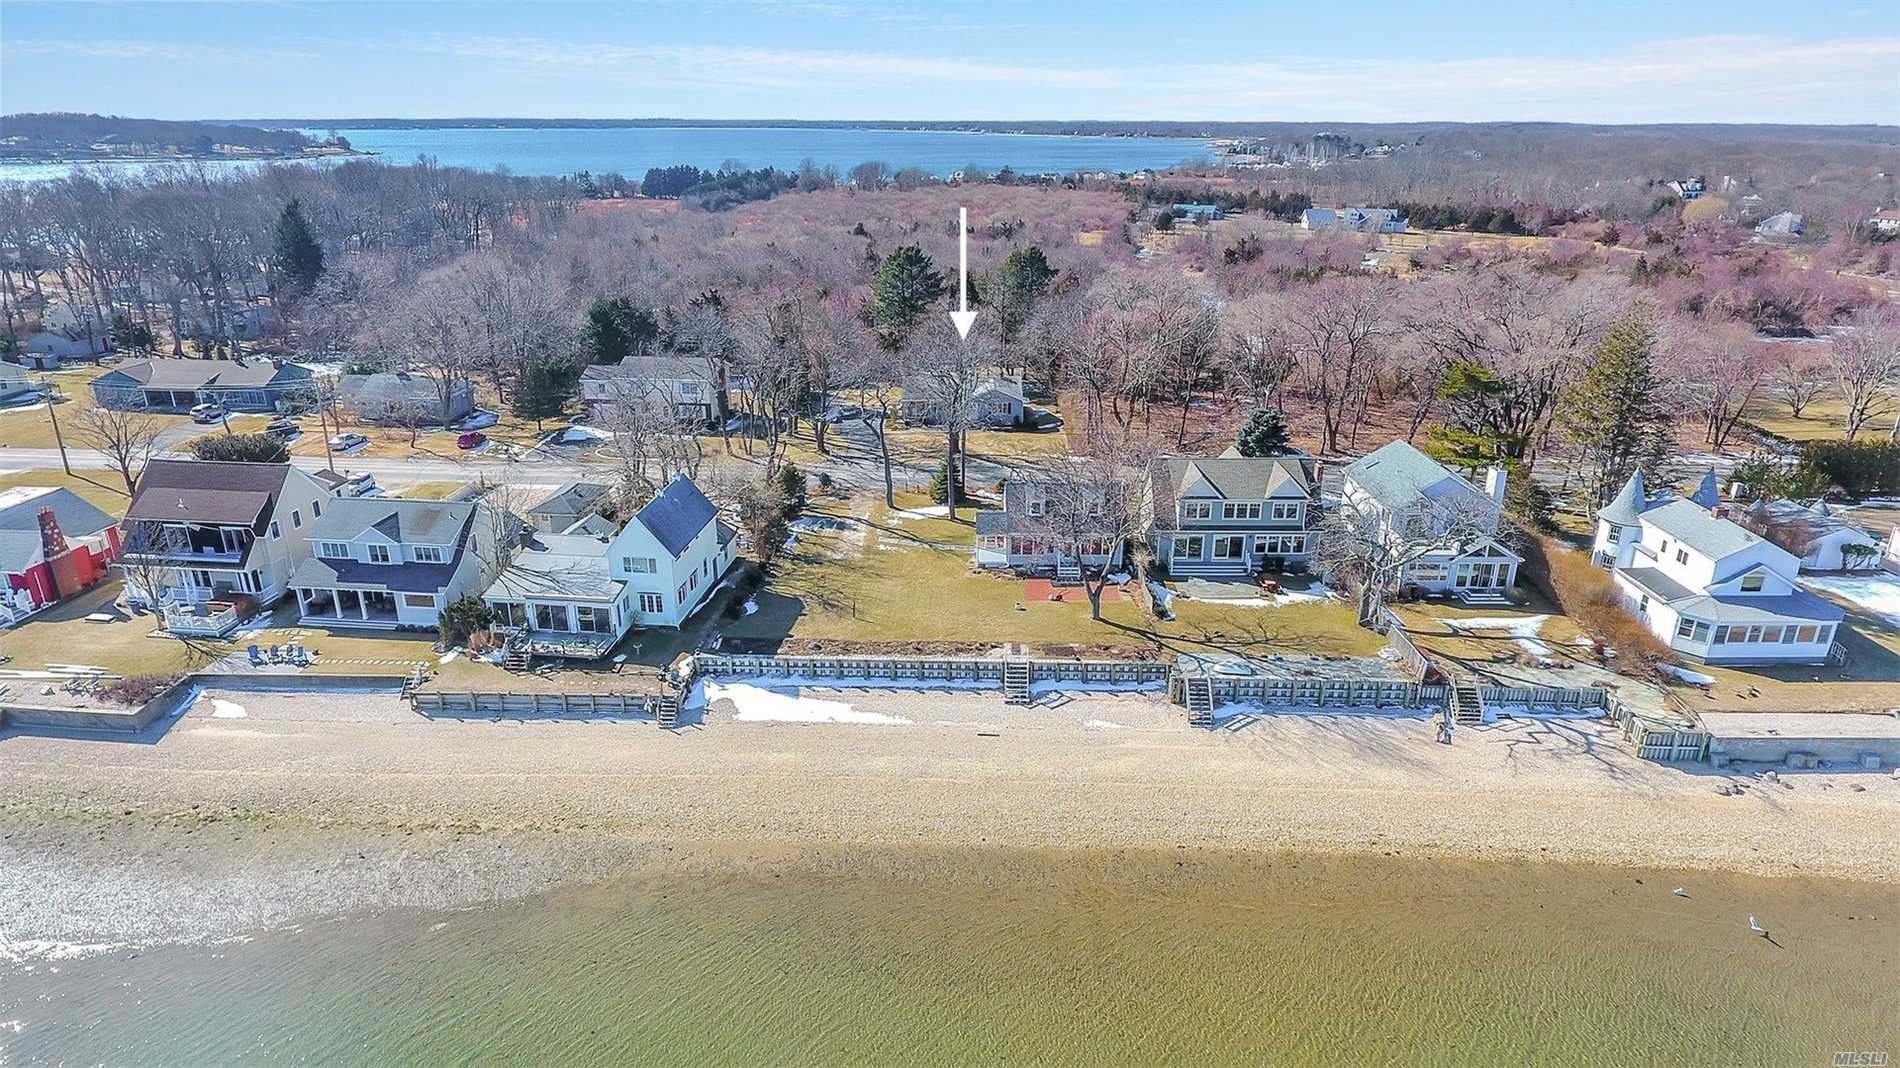 Charming Two Bedroom, Two Bath Waterview Cottage With Unobstructed Views Of Pipes Cove To Shelter Island. Easy Access To Sandy Bay Beach And Greenport Village. All Oak Flooring, Cac, Outdoor Shower, Large Rear Deck Overlooking 1/3 Acre Property. The Perfect North Fork Getaway.